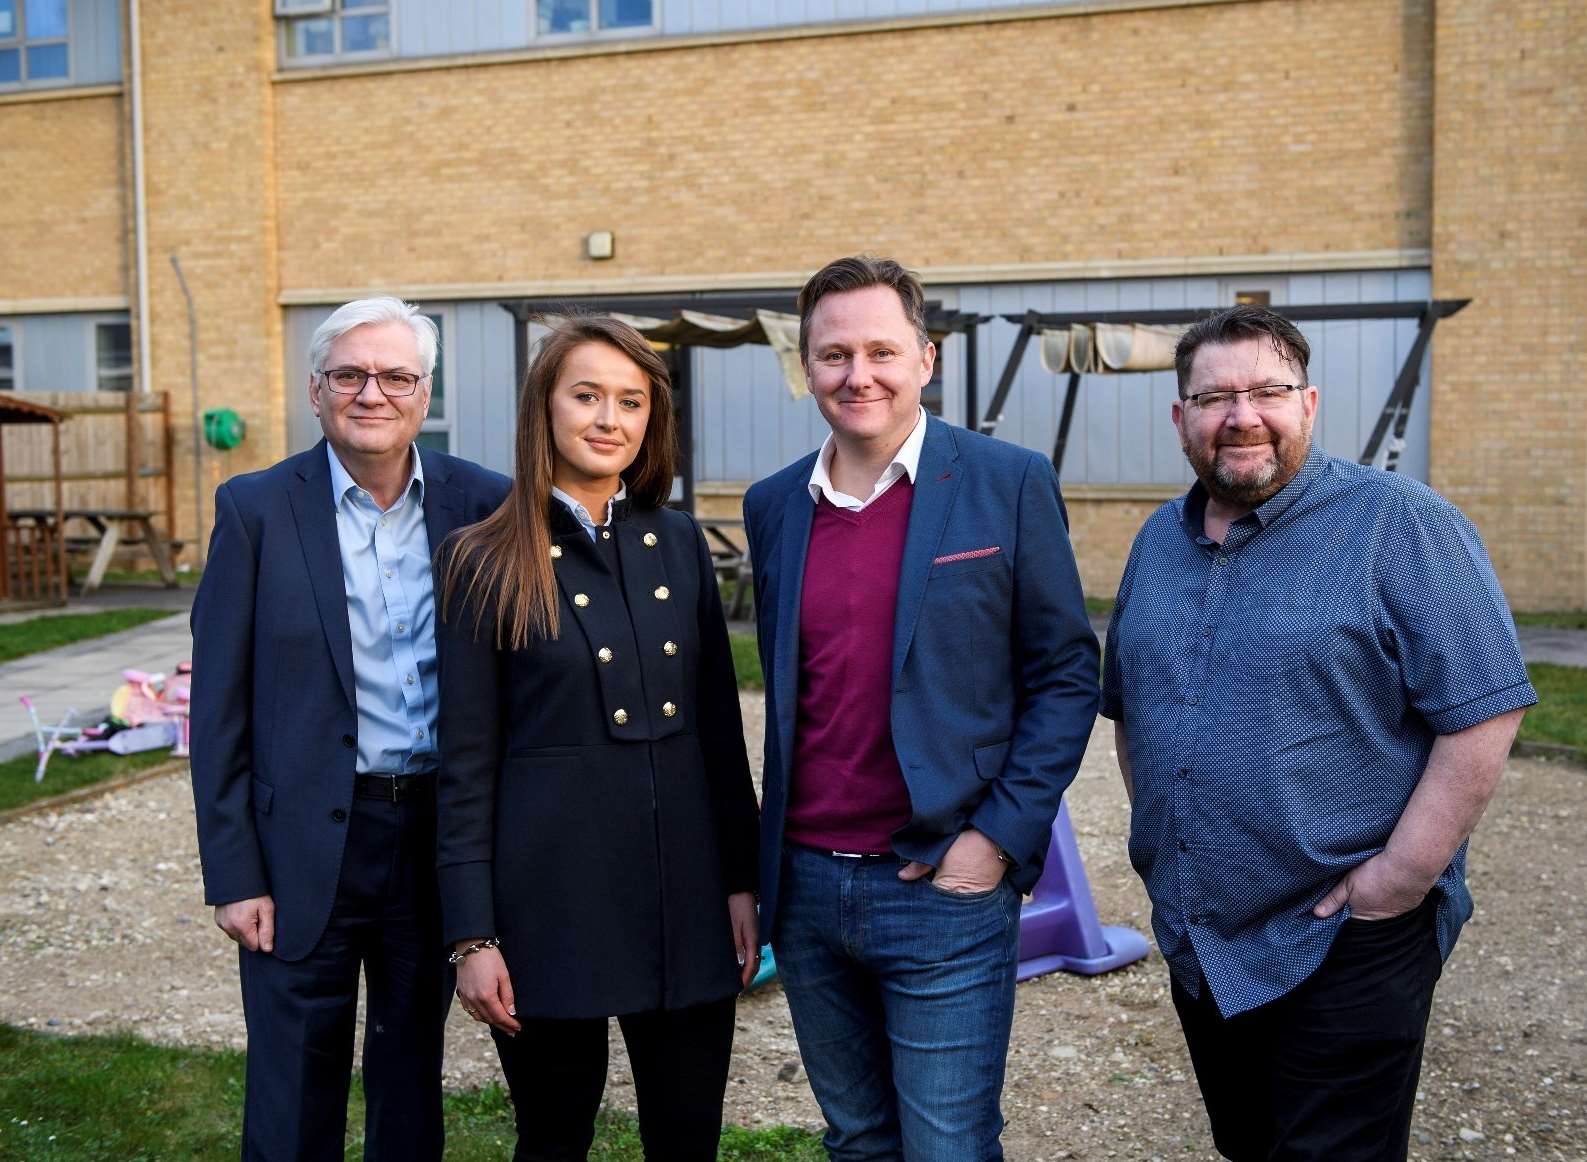 L to R Europa Worldwide Group employees: HR and facilities director,Carl Potter, charity fund co-ordinator, Agne Sruibenaite, managing director, Andrew Baxter, and credit manager, Chris McGurk.